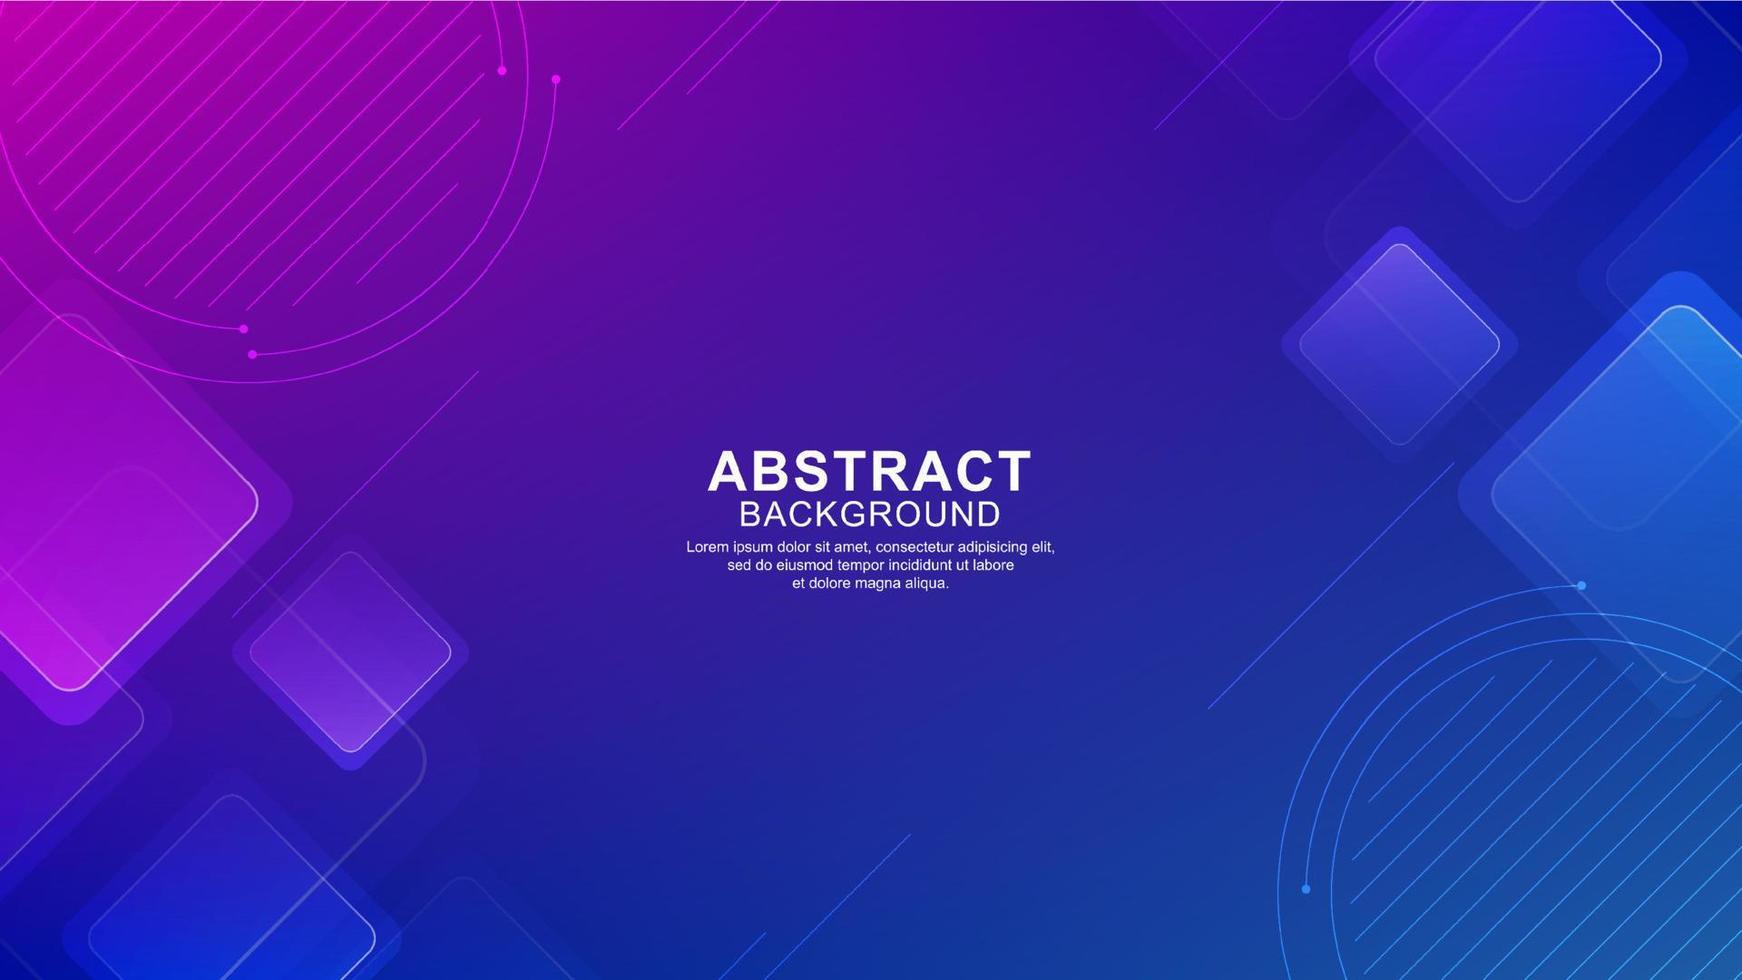 Modern geometric background with gradient colors vector